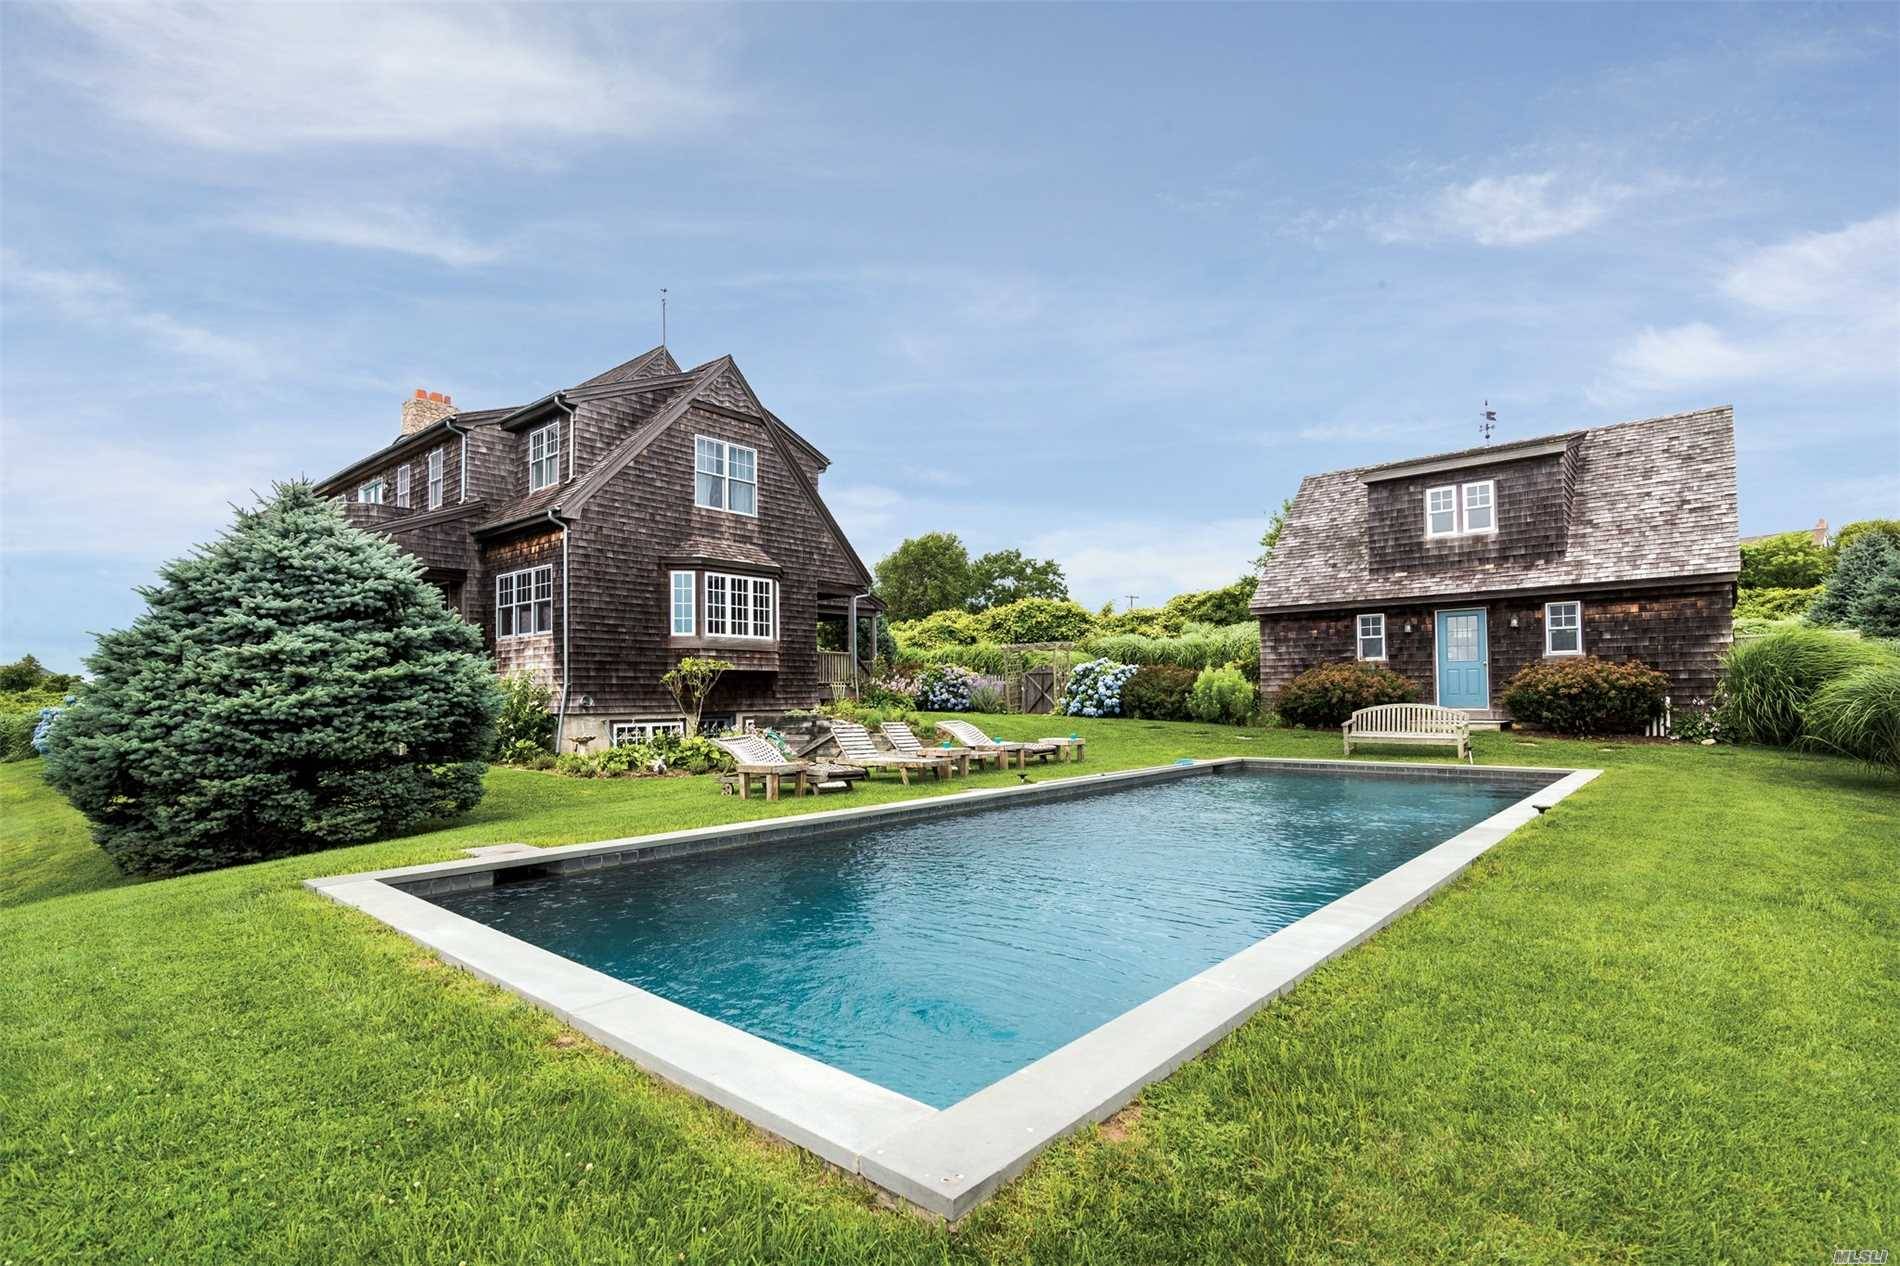 Stunning 4 Br, 4 Ba West-Facing East Lake Estate With Beautiful Sunsets Over Lake Montauk.